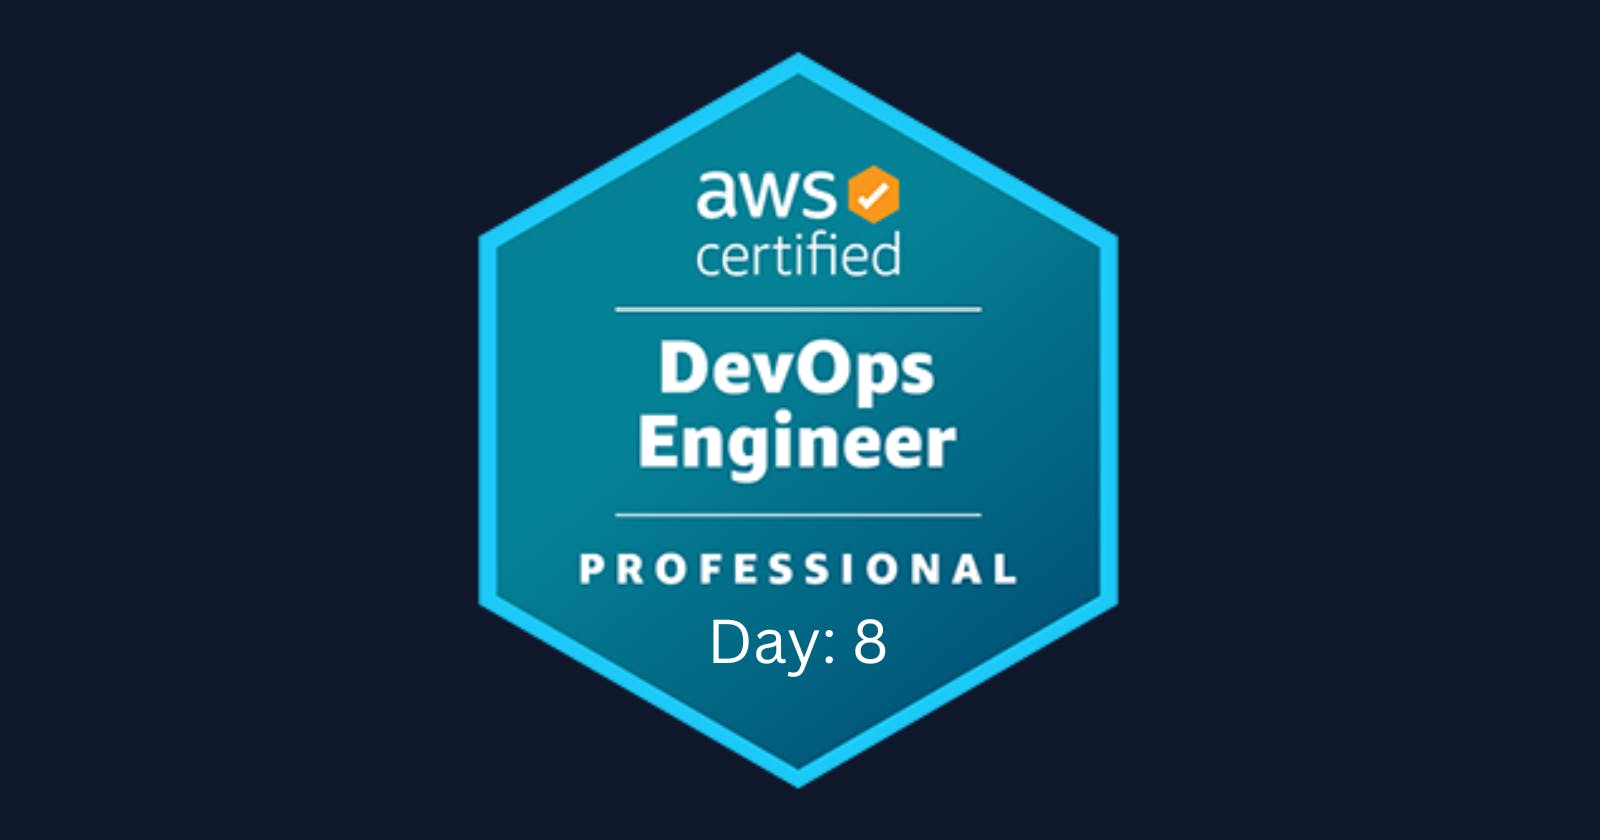 🚀 Exciting Day 8 of My AWS DevOps Professional Journey! 🚀